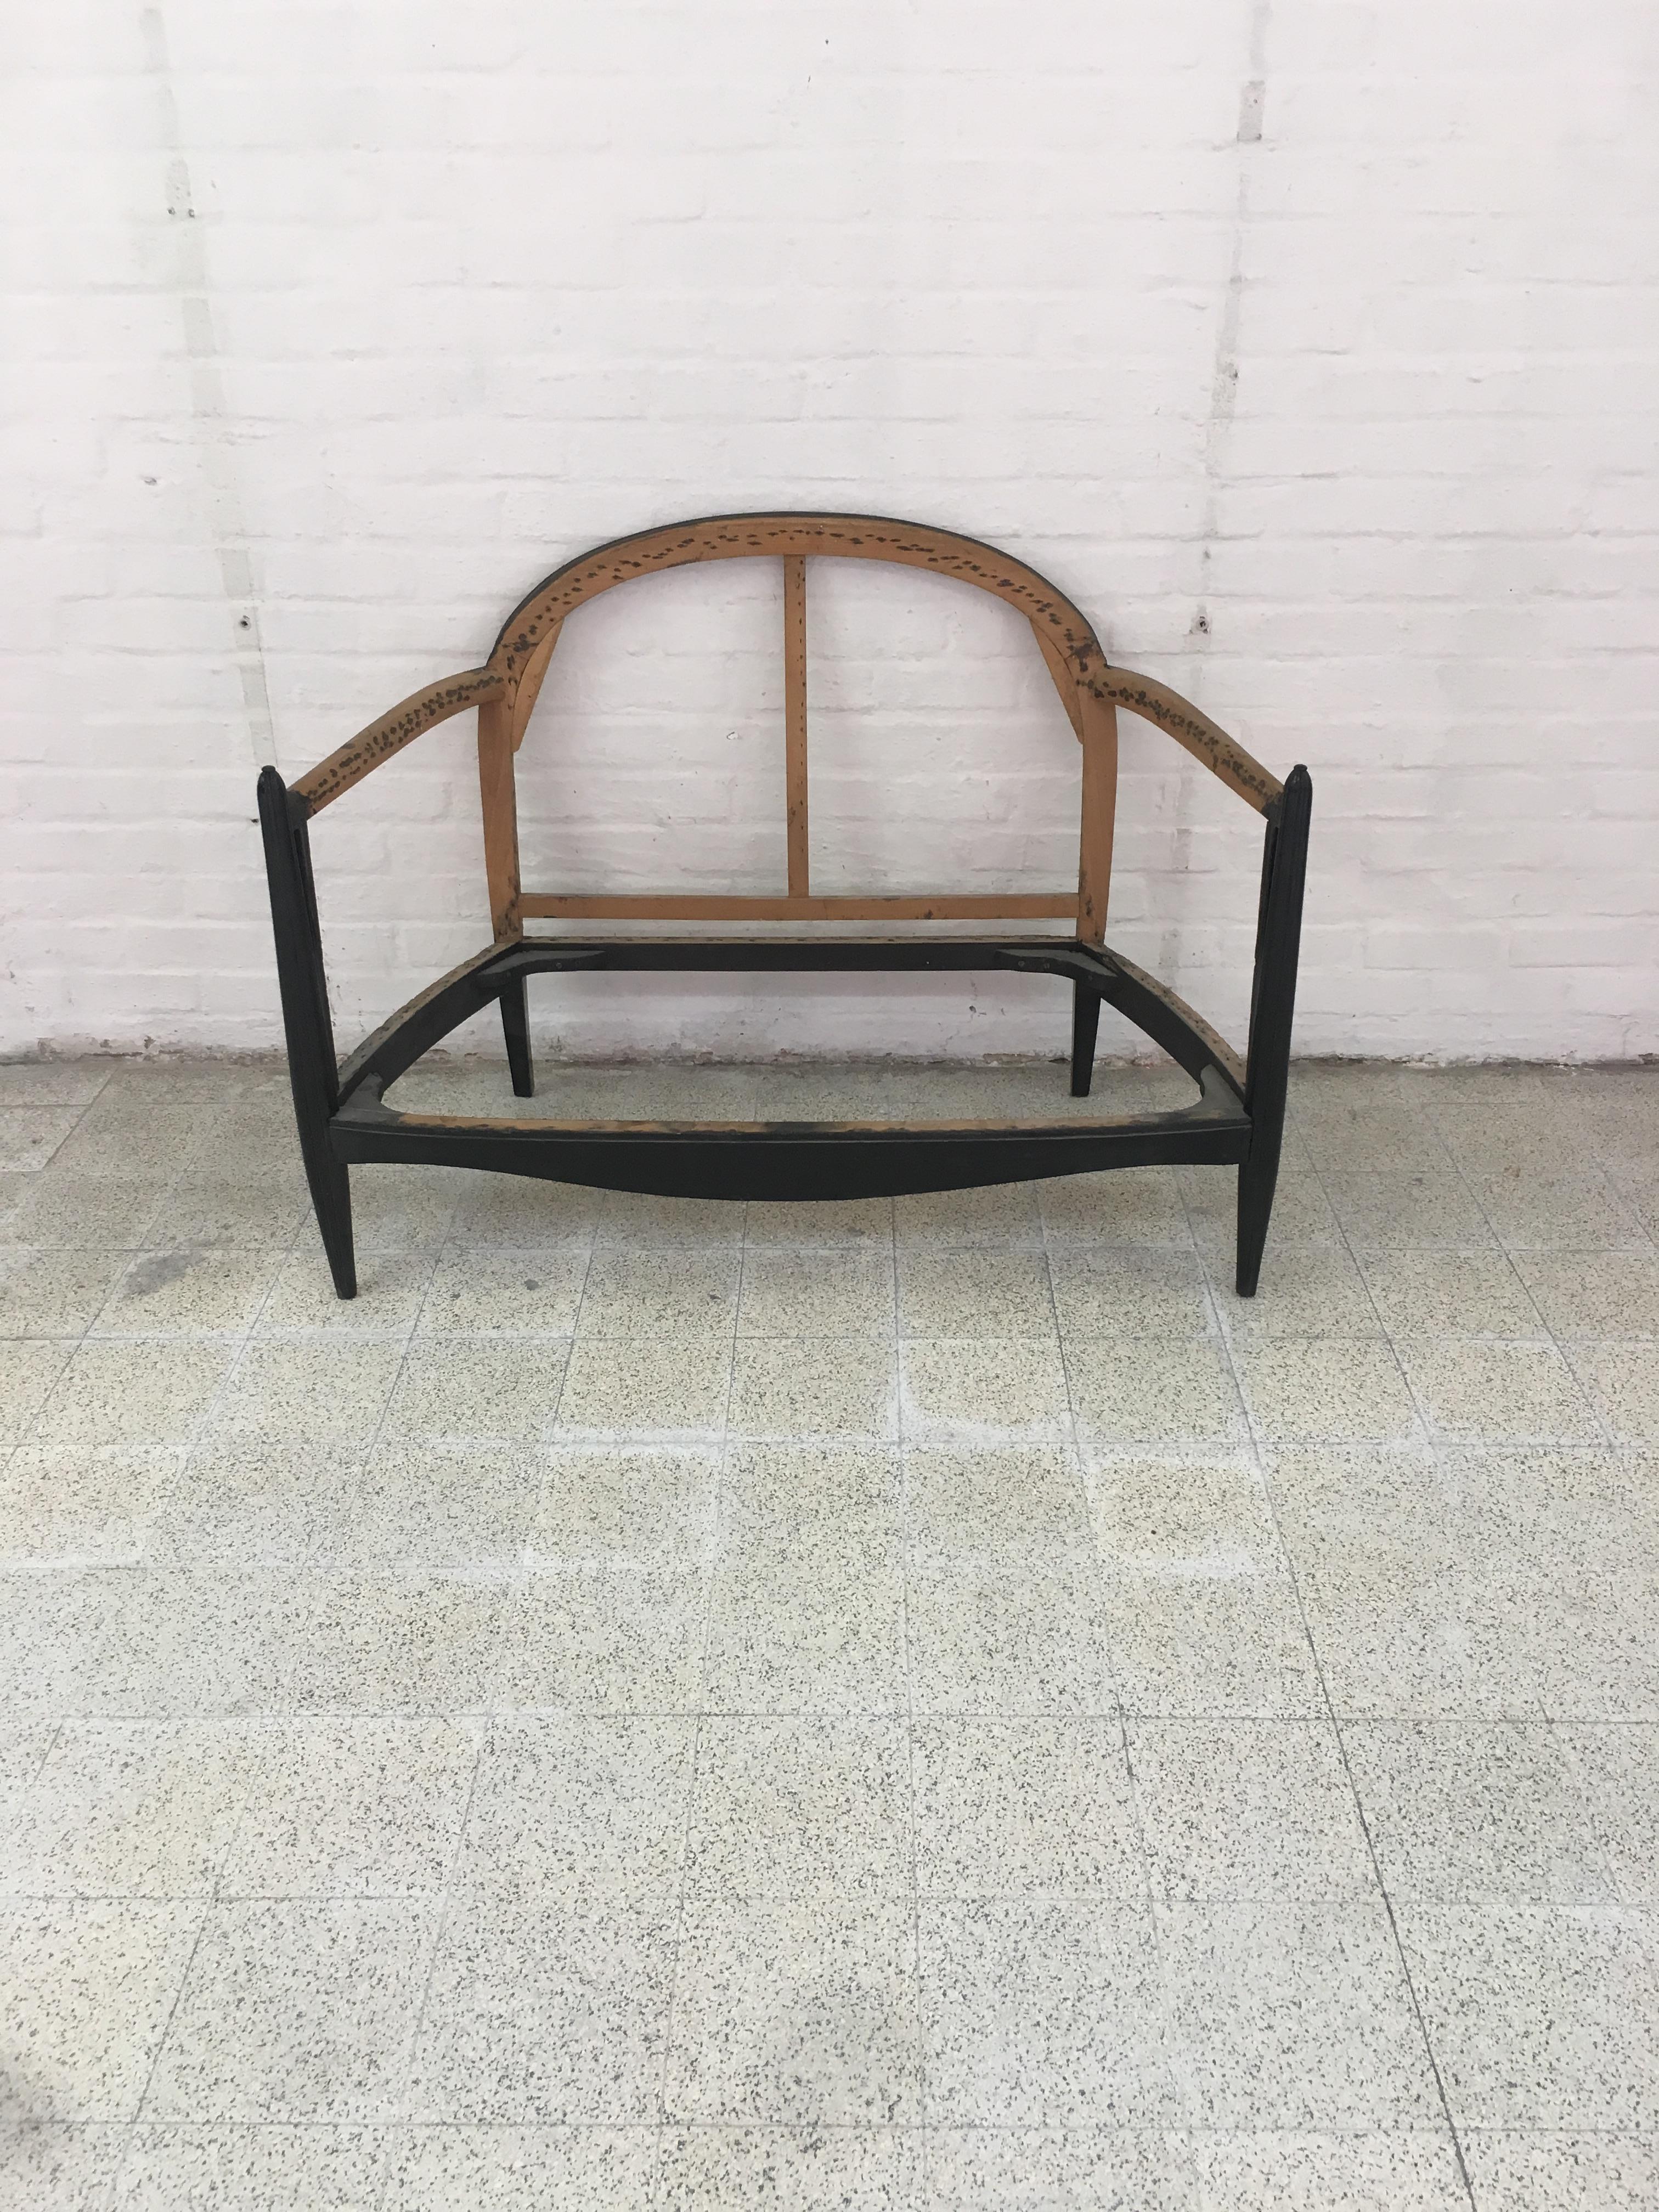 Art Deco living room in blackened wood, circa 1920-1930
Composed of a bench and 2 armchairs.
The seats have been cleared, the woods completely restored, stained black and varnished.
They are ready for a new upholstery
Measures: Armchair 80 x 60